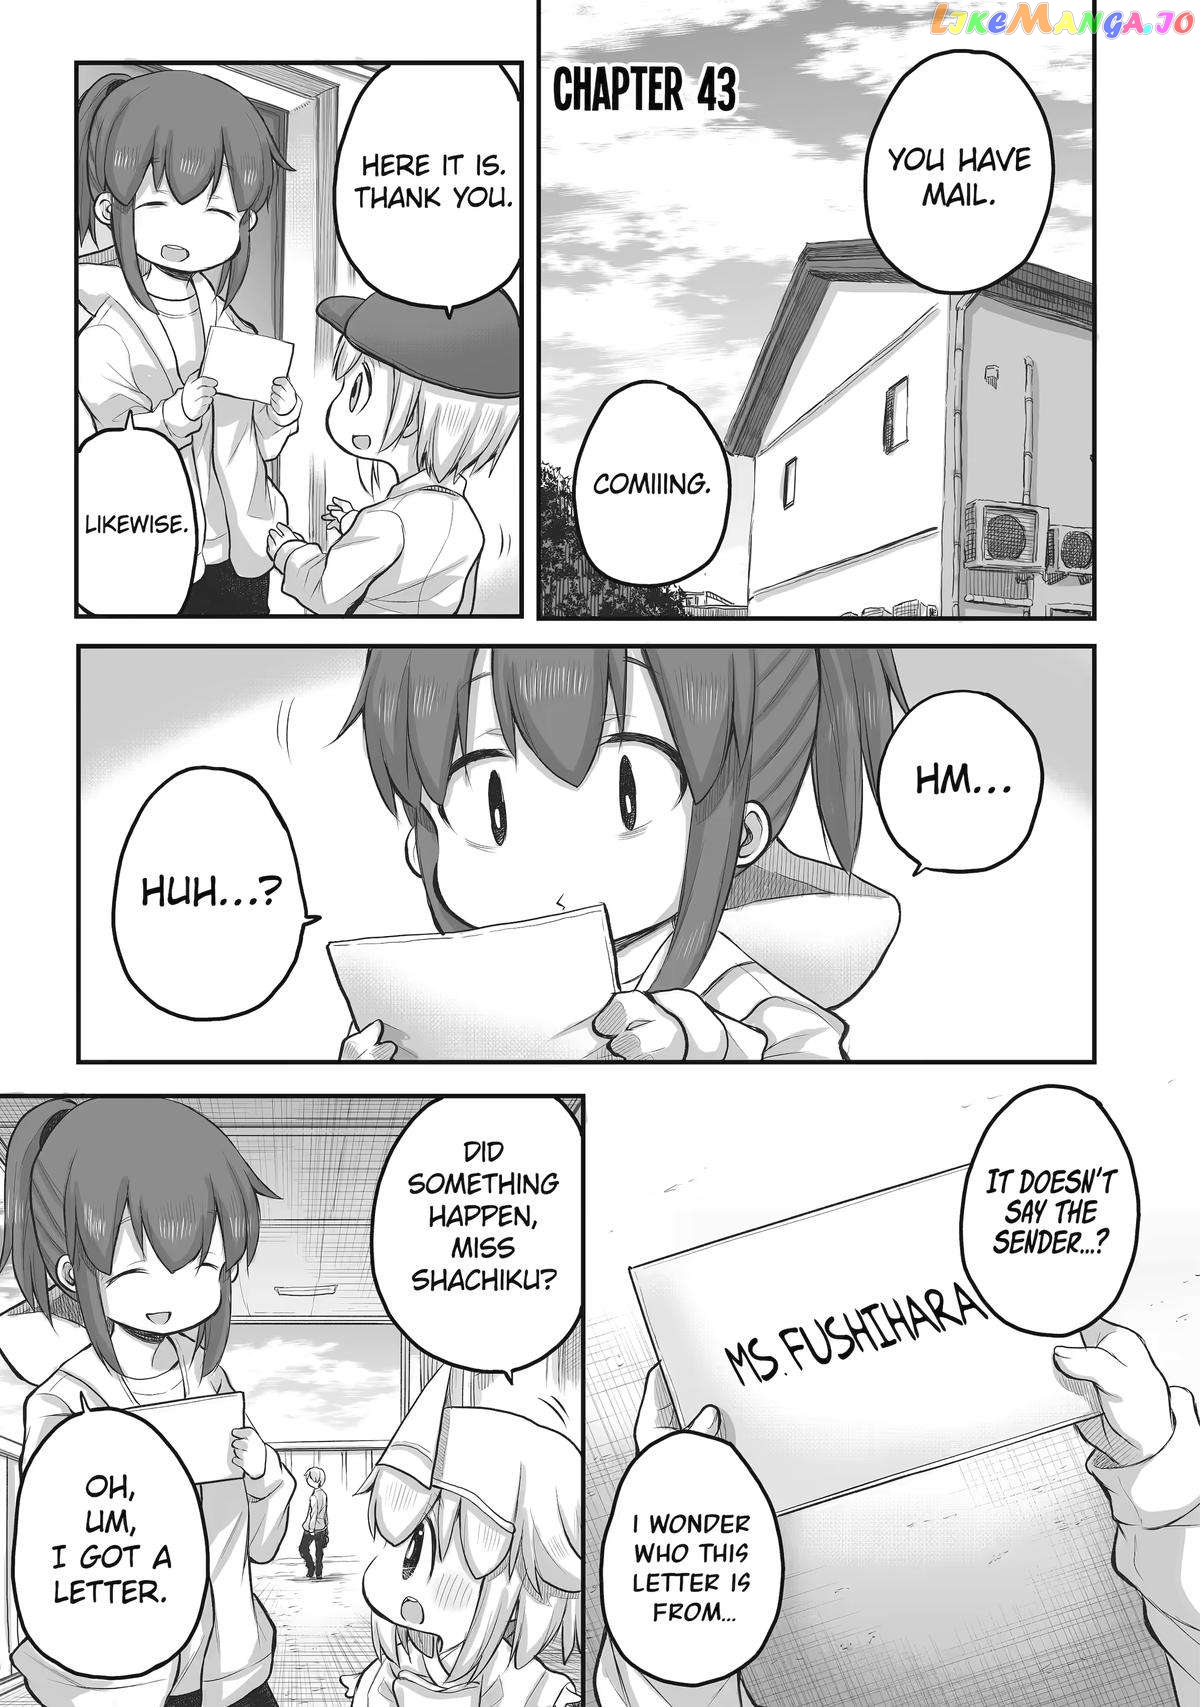 Ms. Corporate Slave Wants to be Healed by a Loli Spirit - chapter 43 - #1